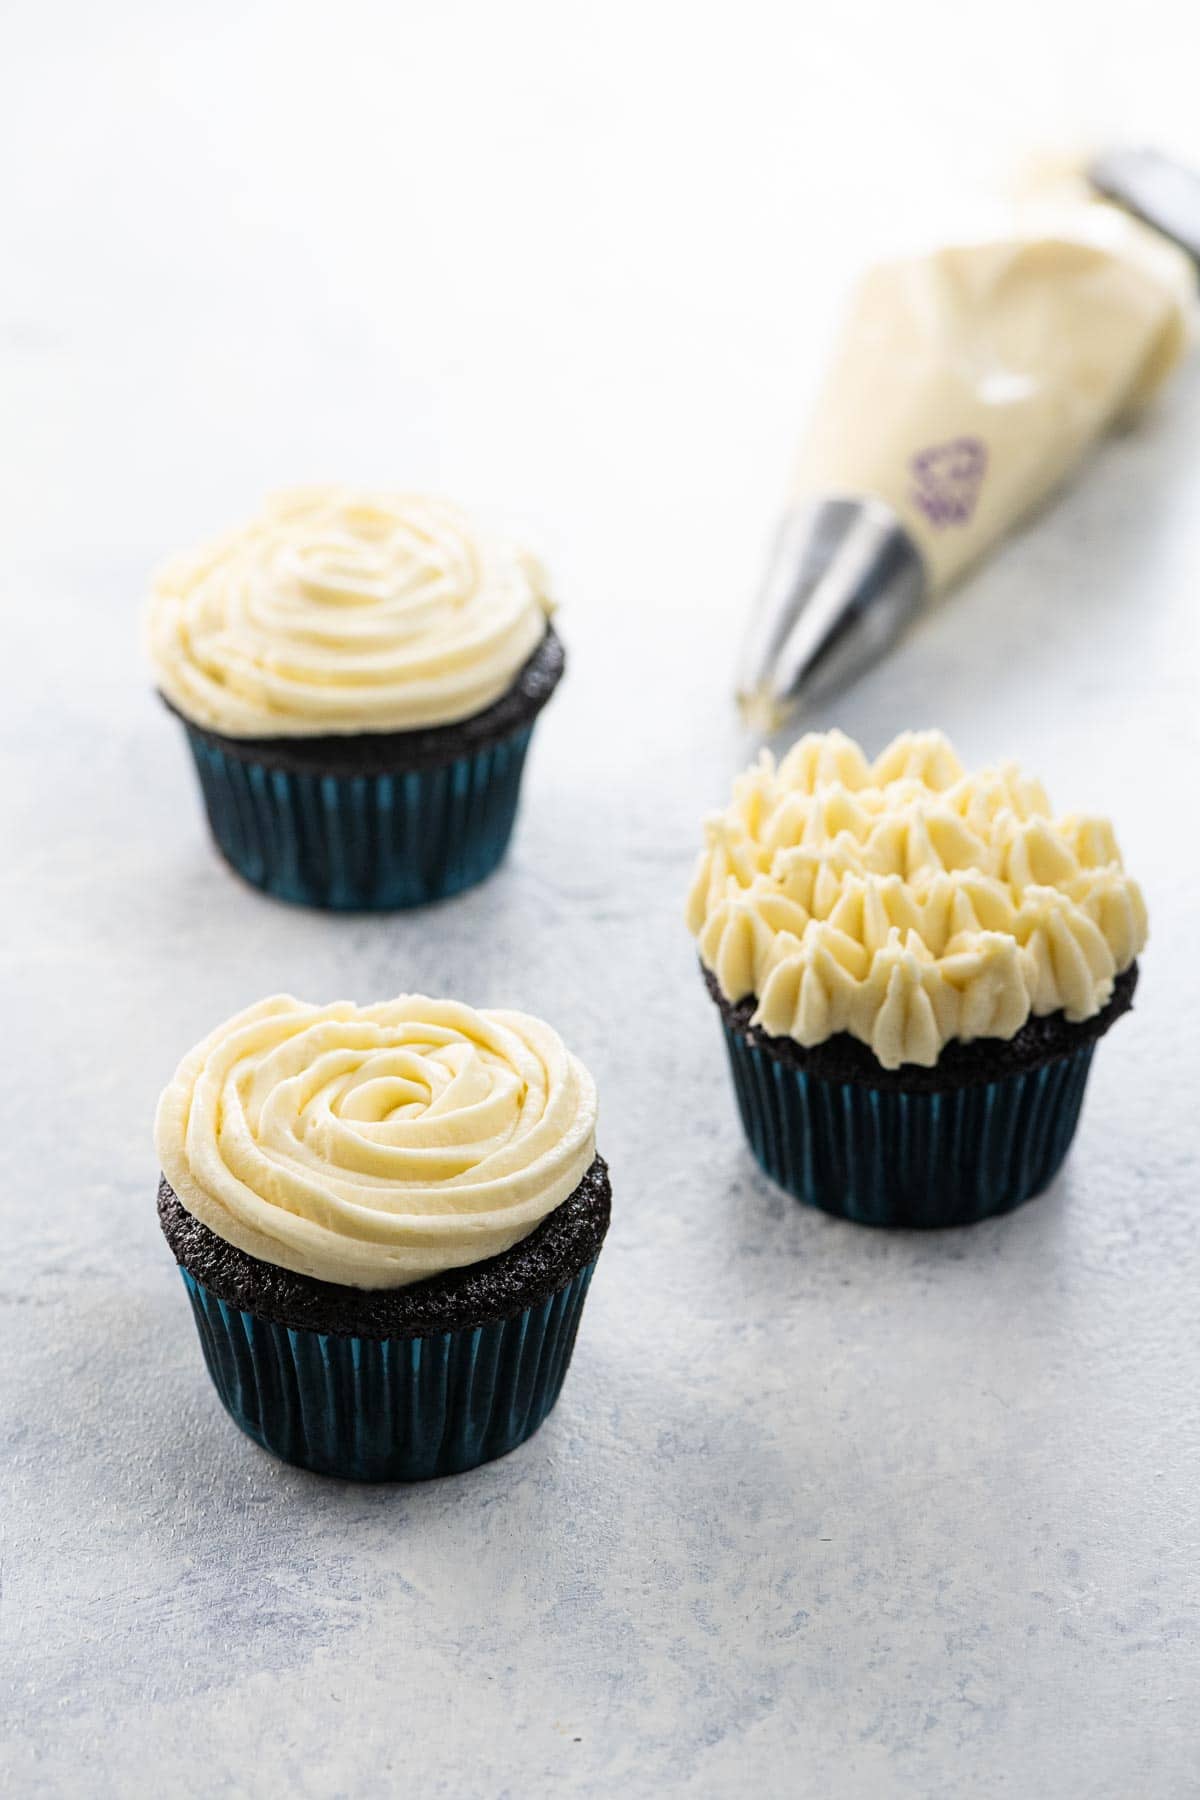 chocolate cupcakes with stable whipped cream cheese frosting for piping, and frosting in a piping bag